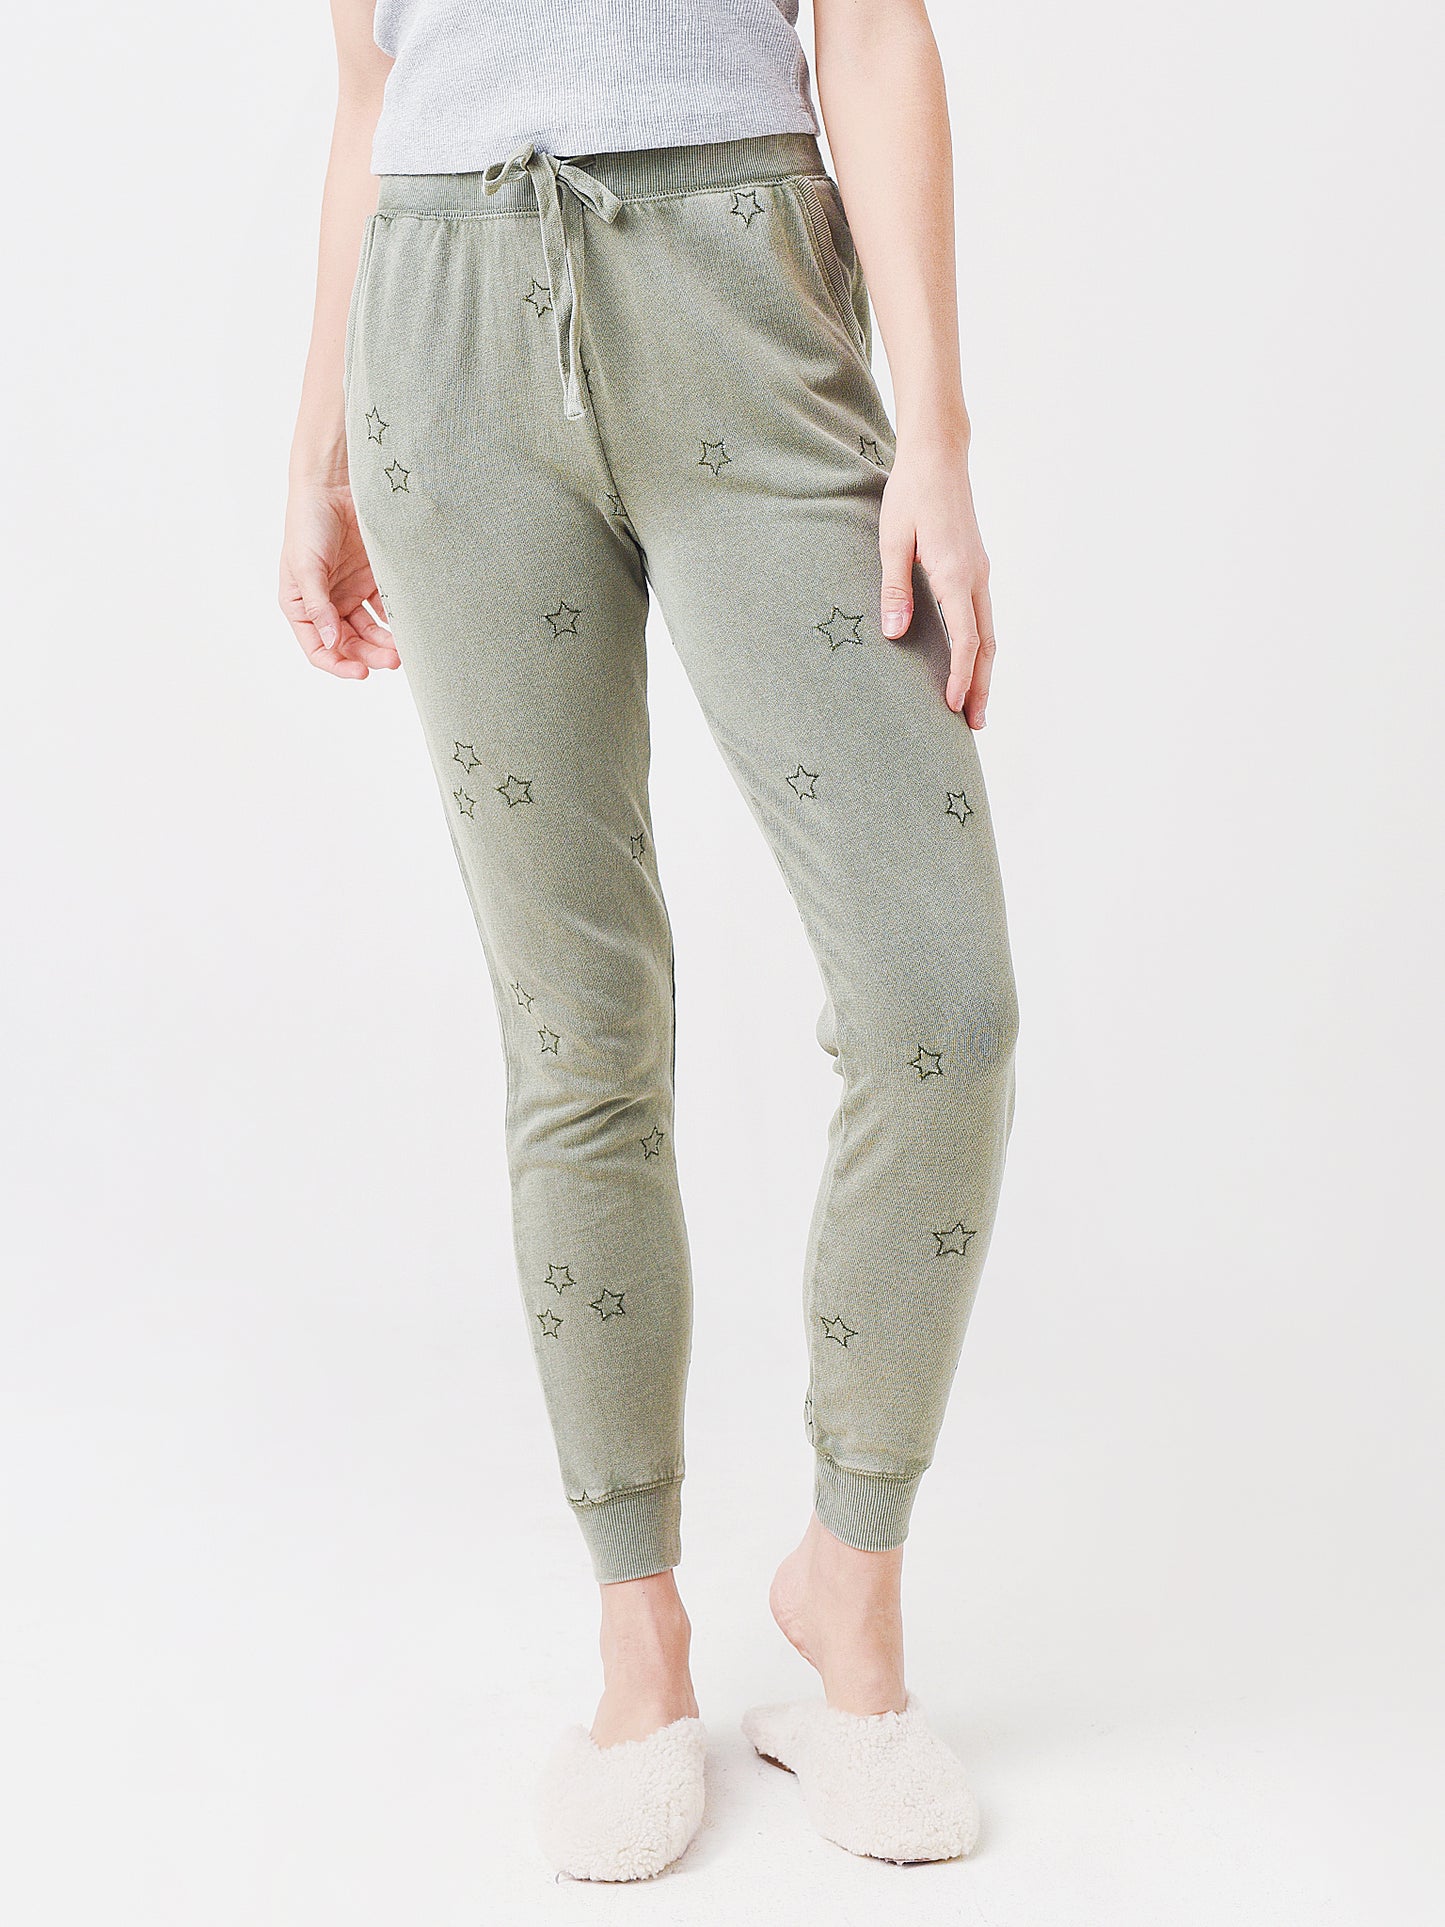 Z Supply Women's Goldie Embroidered Star Jogger